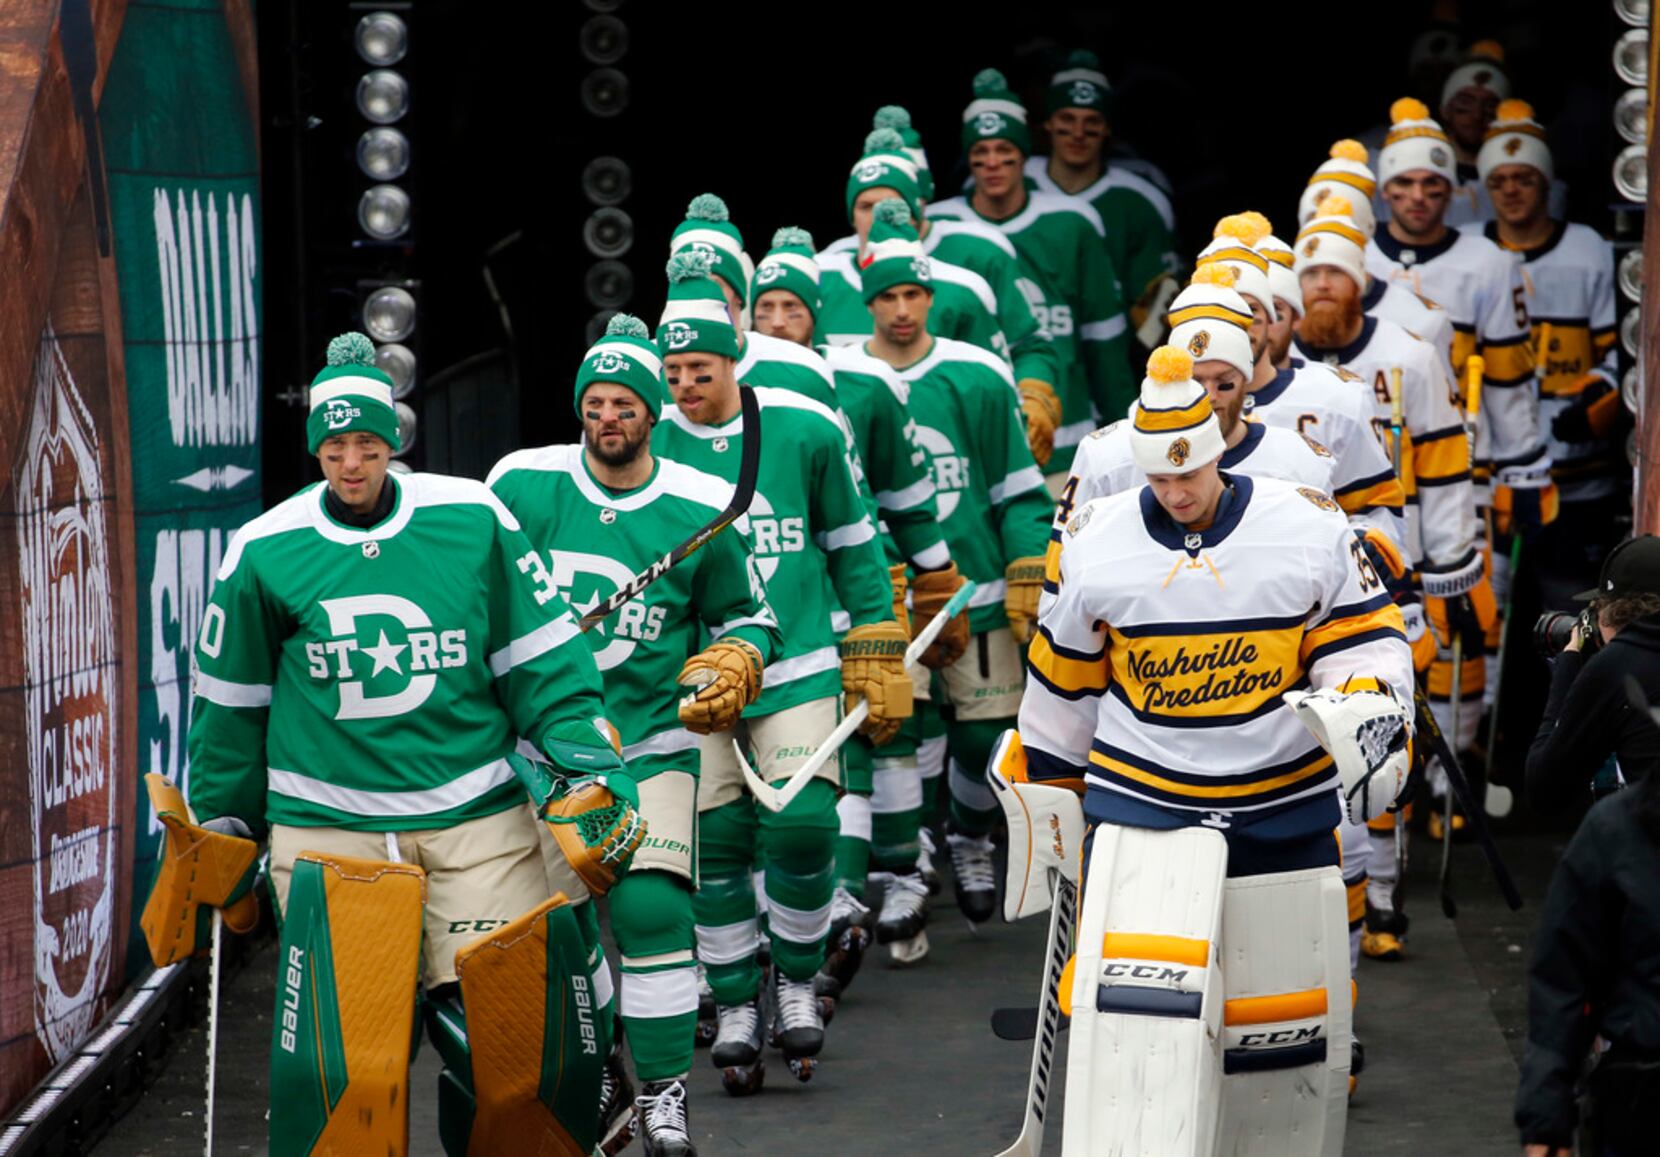 Winter Classic notebook: NHL attendance history, Corey Perry's ejection and  more from Stars-Predators